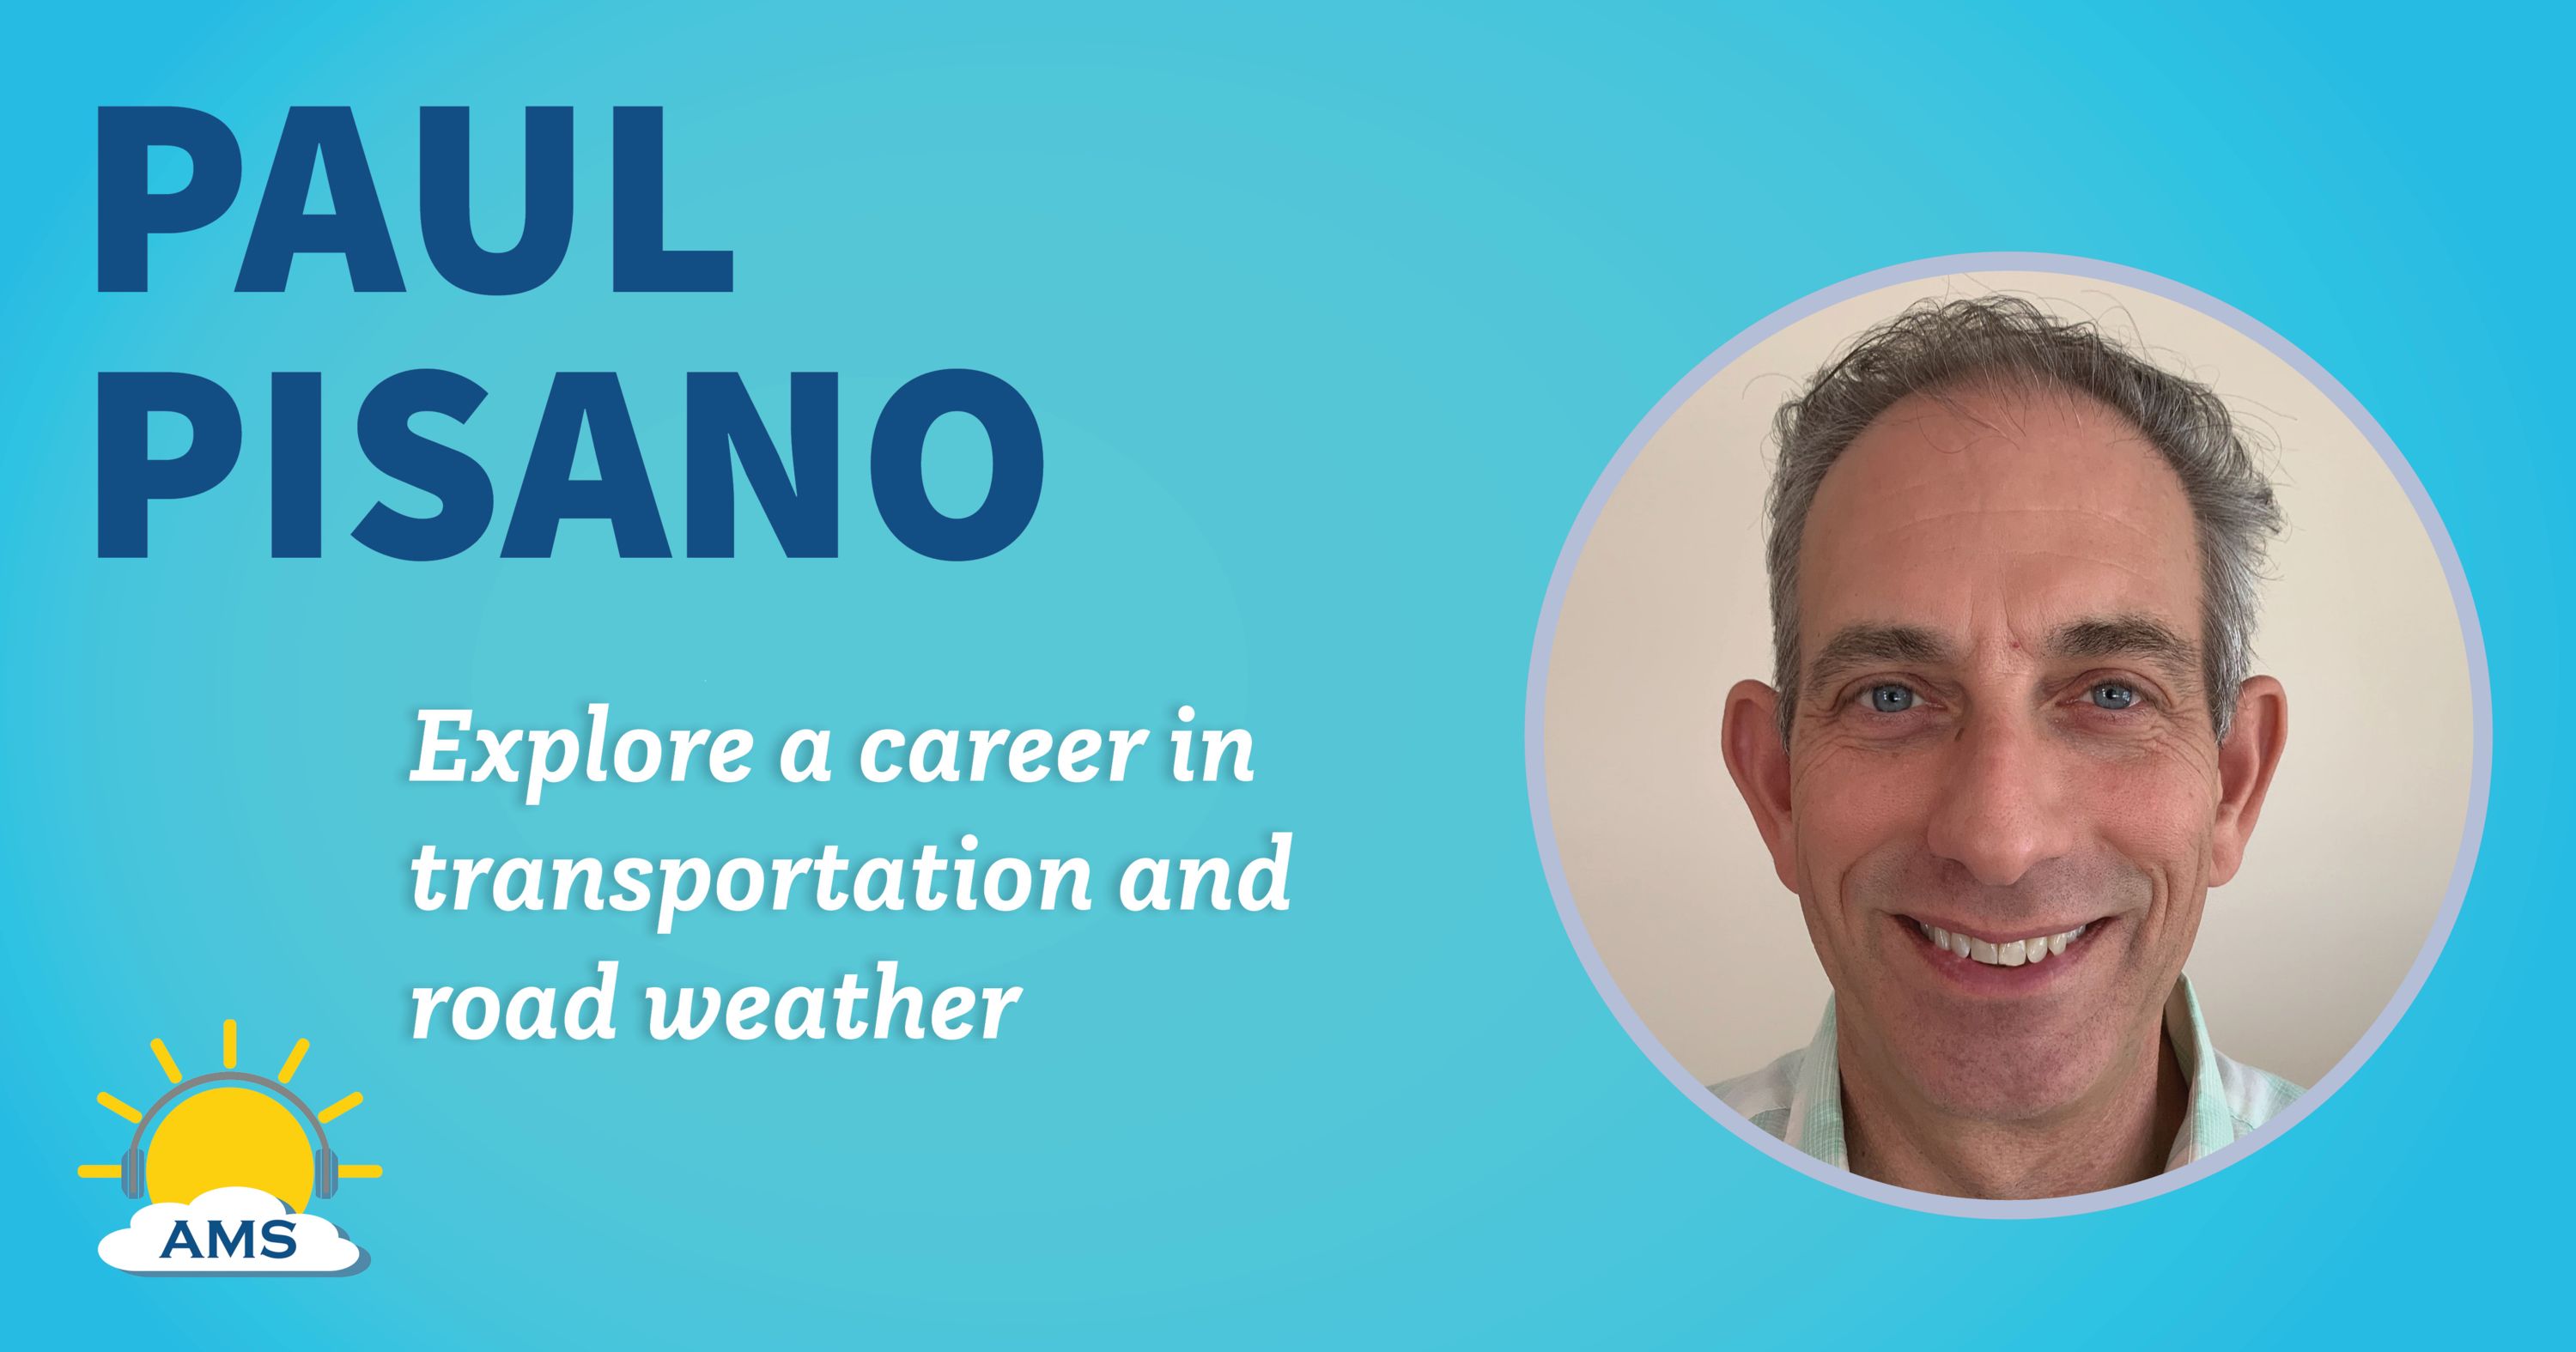 paul pisano headshot graphic with teaser text that reads &quotexplore a career in transportation and road weather"